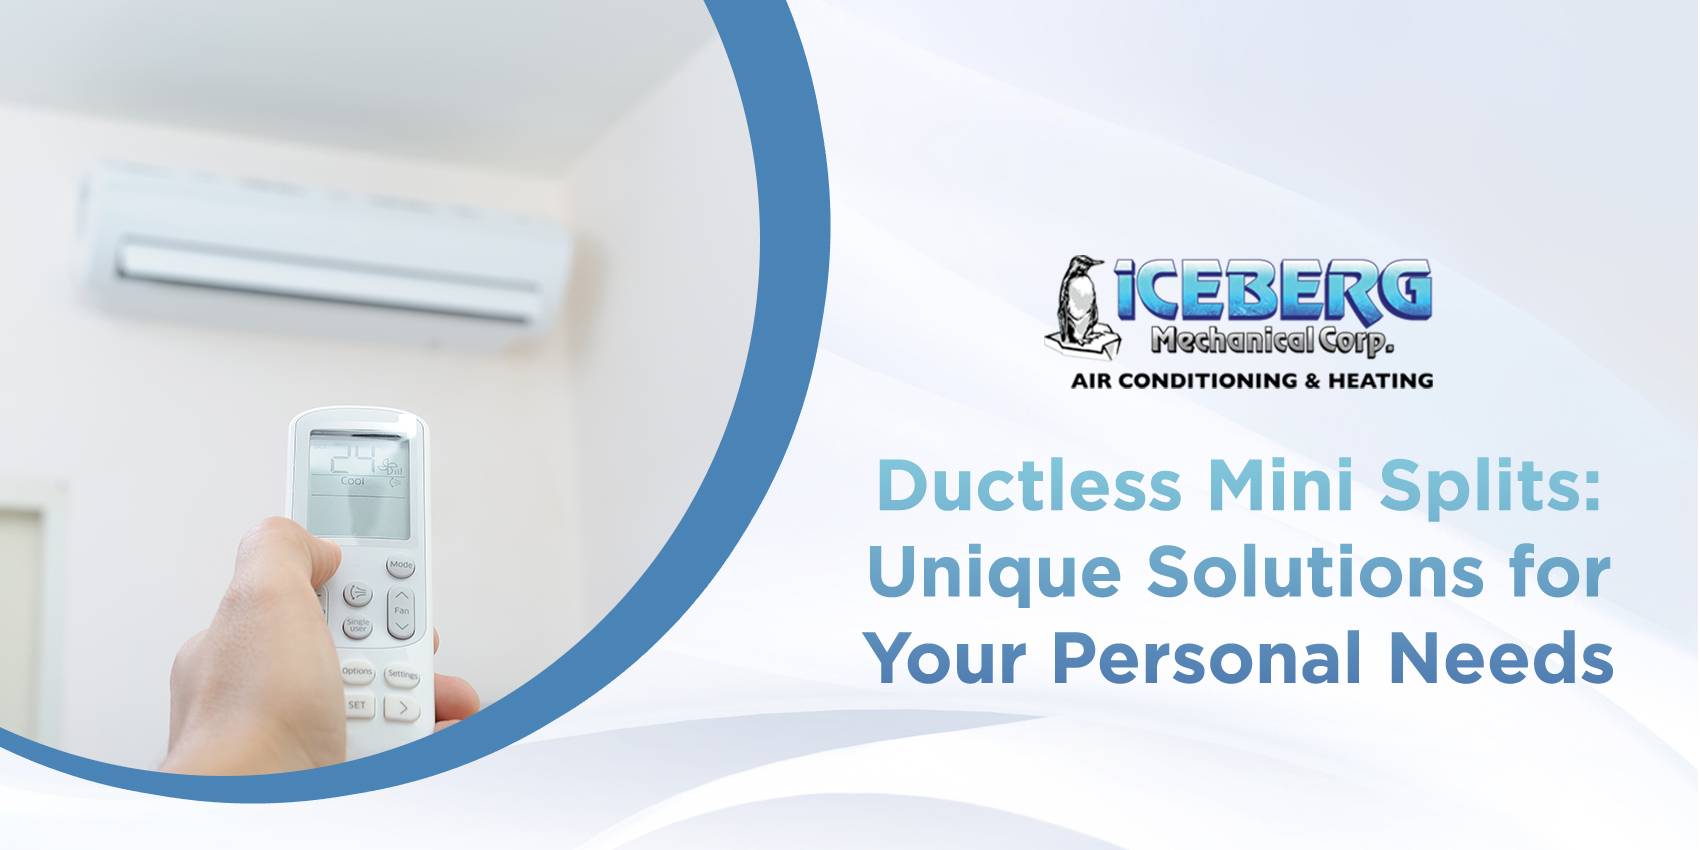 Ductless Mini Splits: Unique Solutions for Your Personal Needs